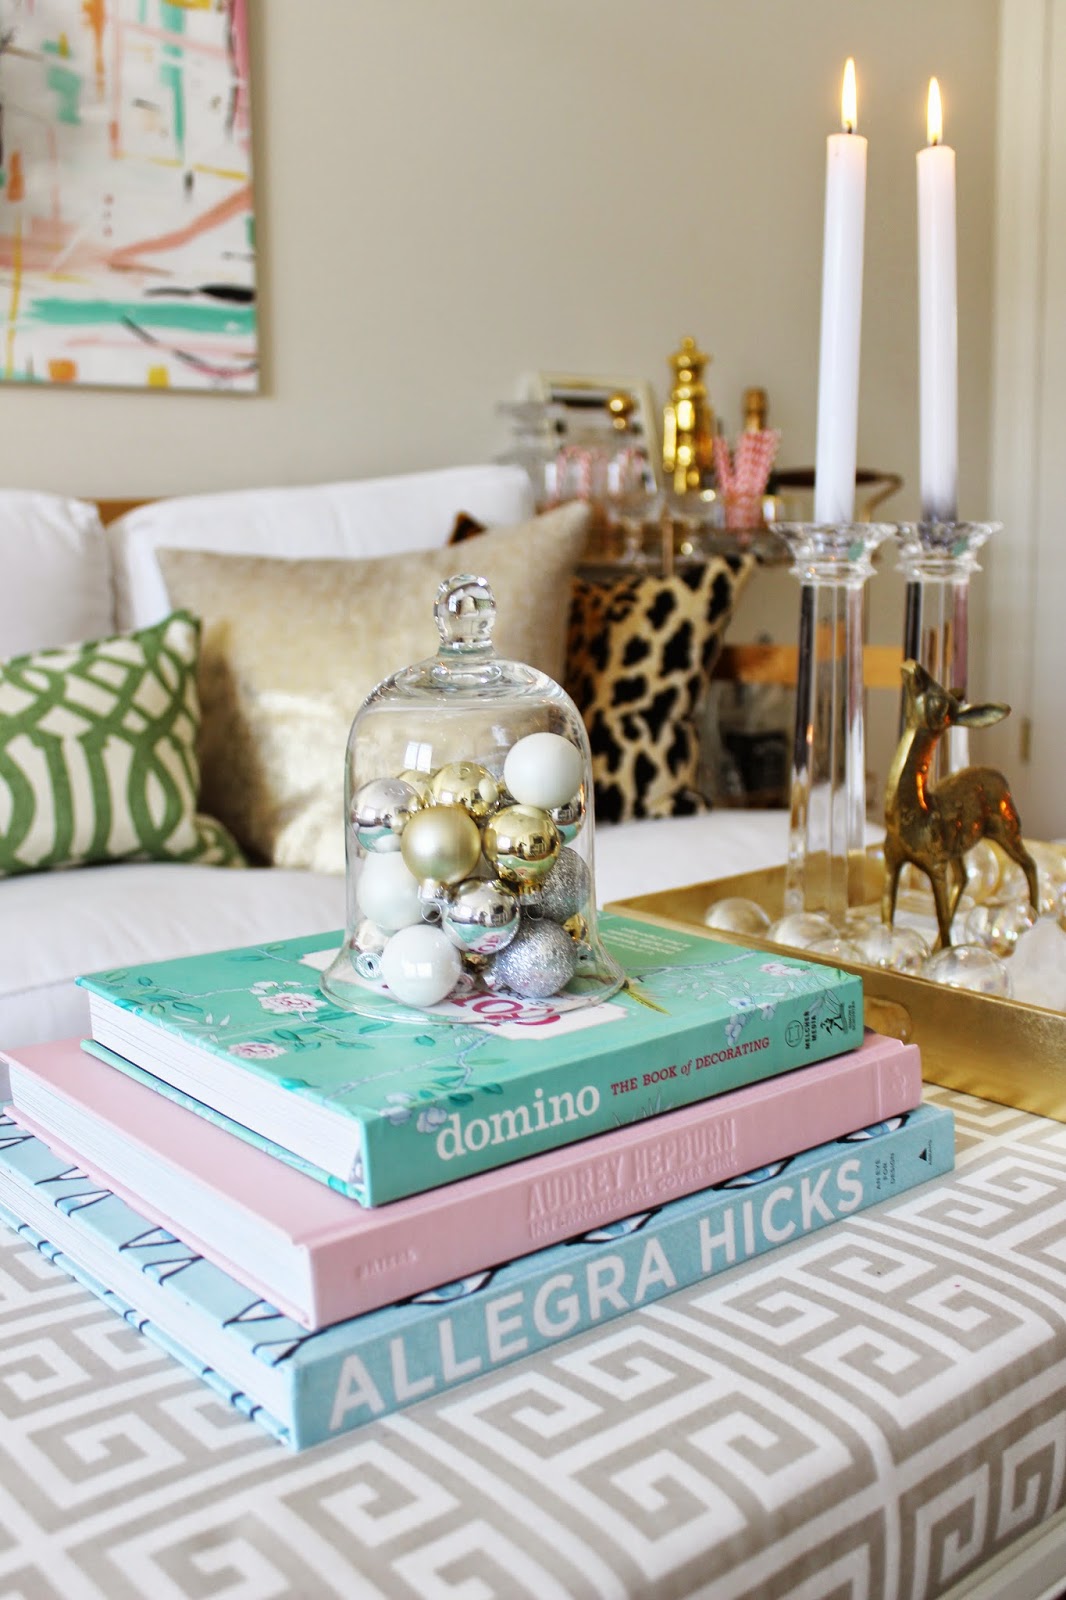 Apartment Decor Was Featured Along With My Tips And Tricks For